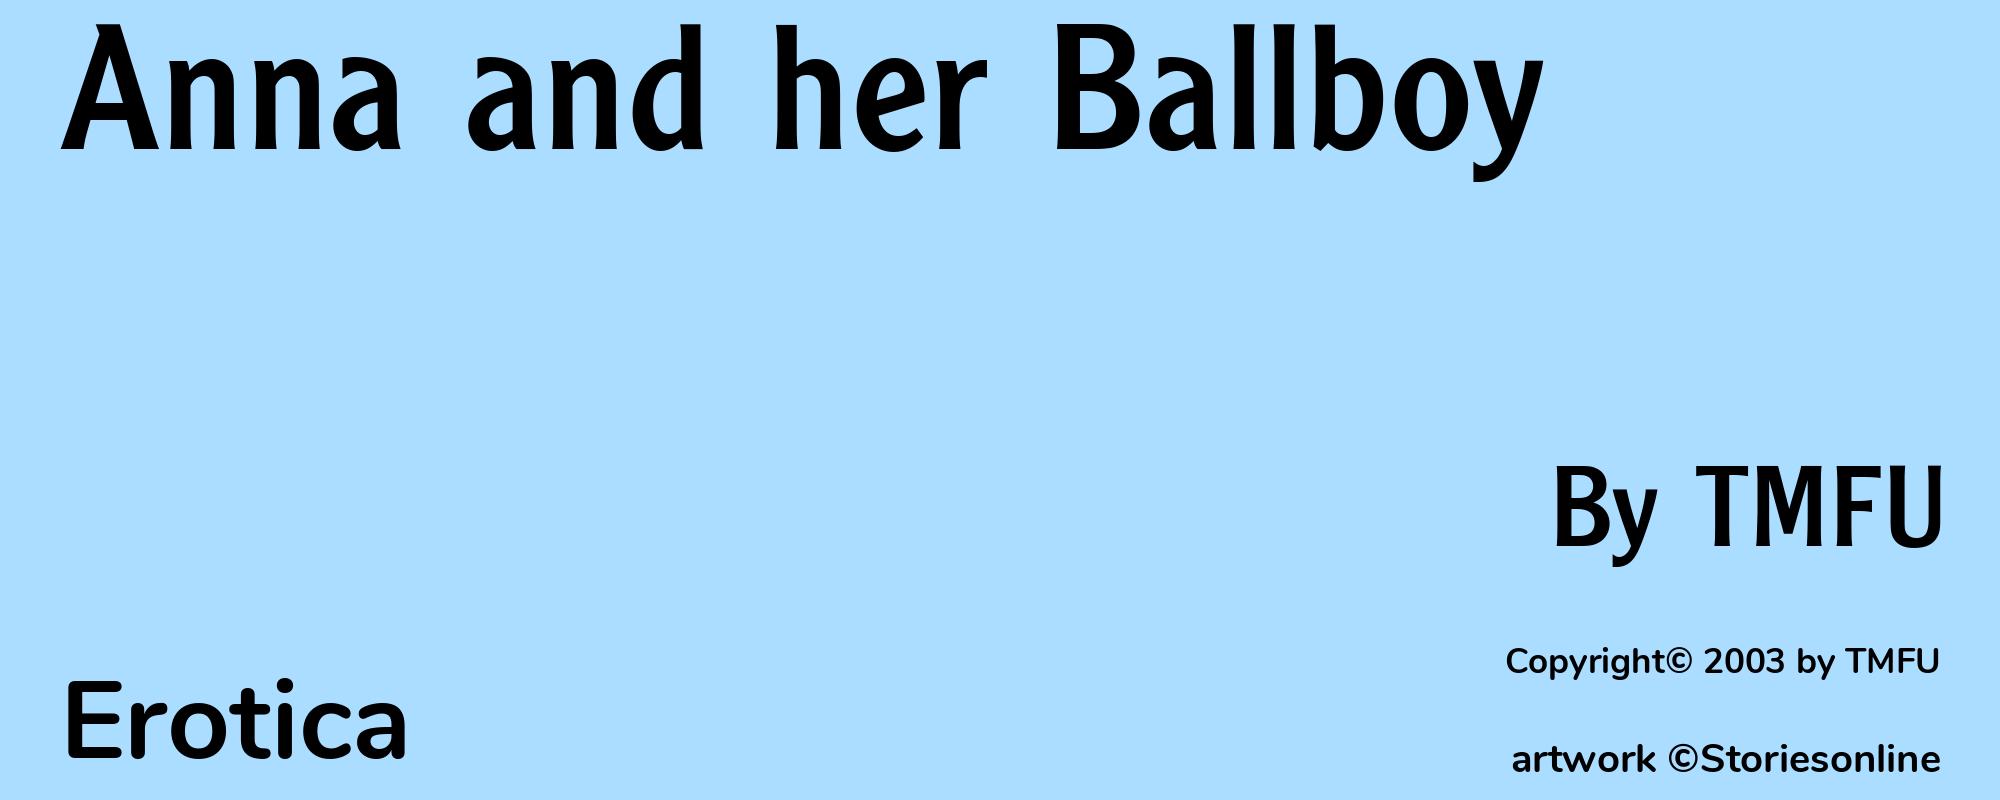 Anna and her Ballboy - Cover